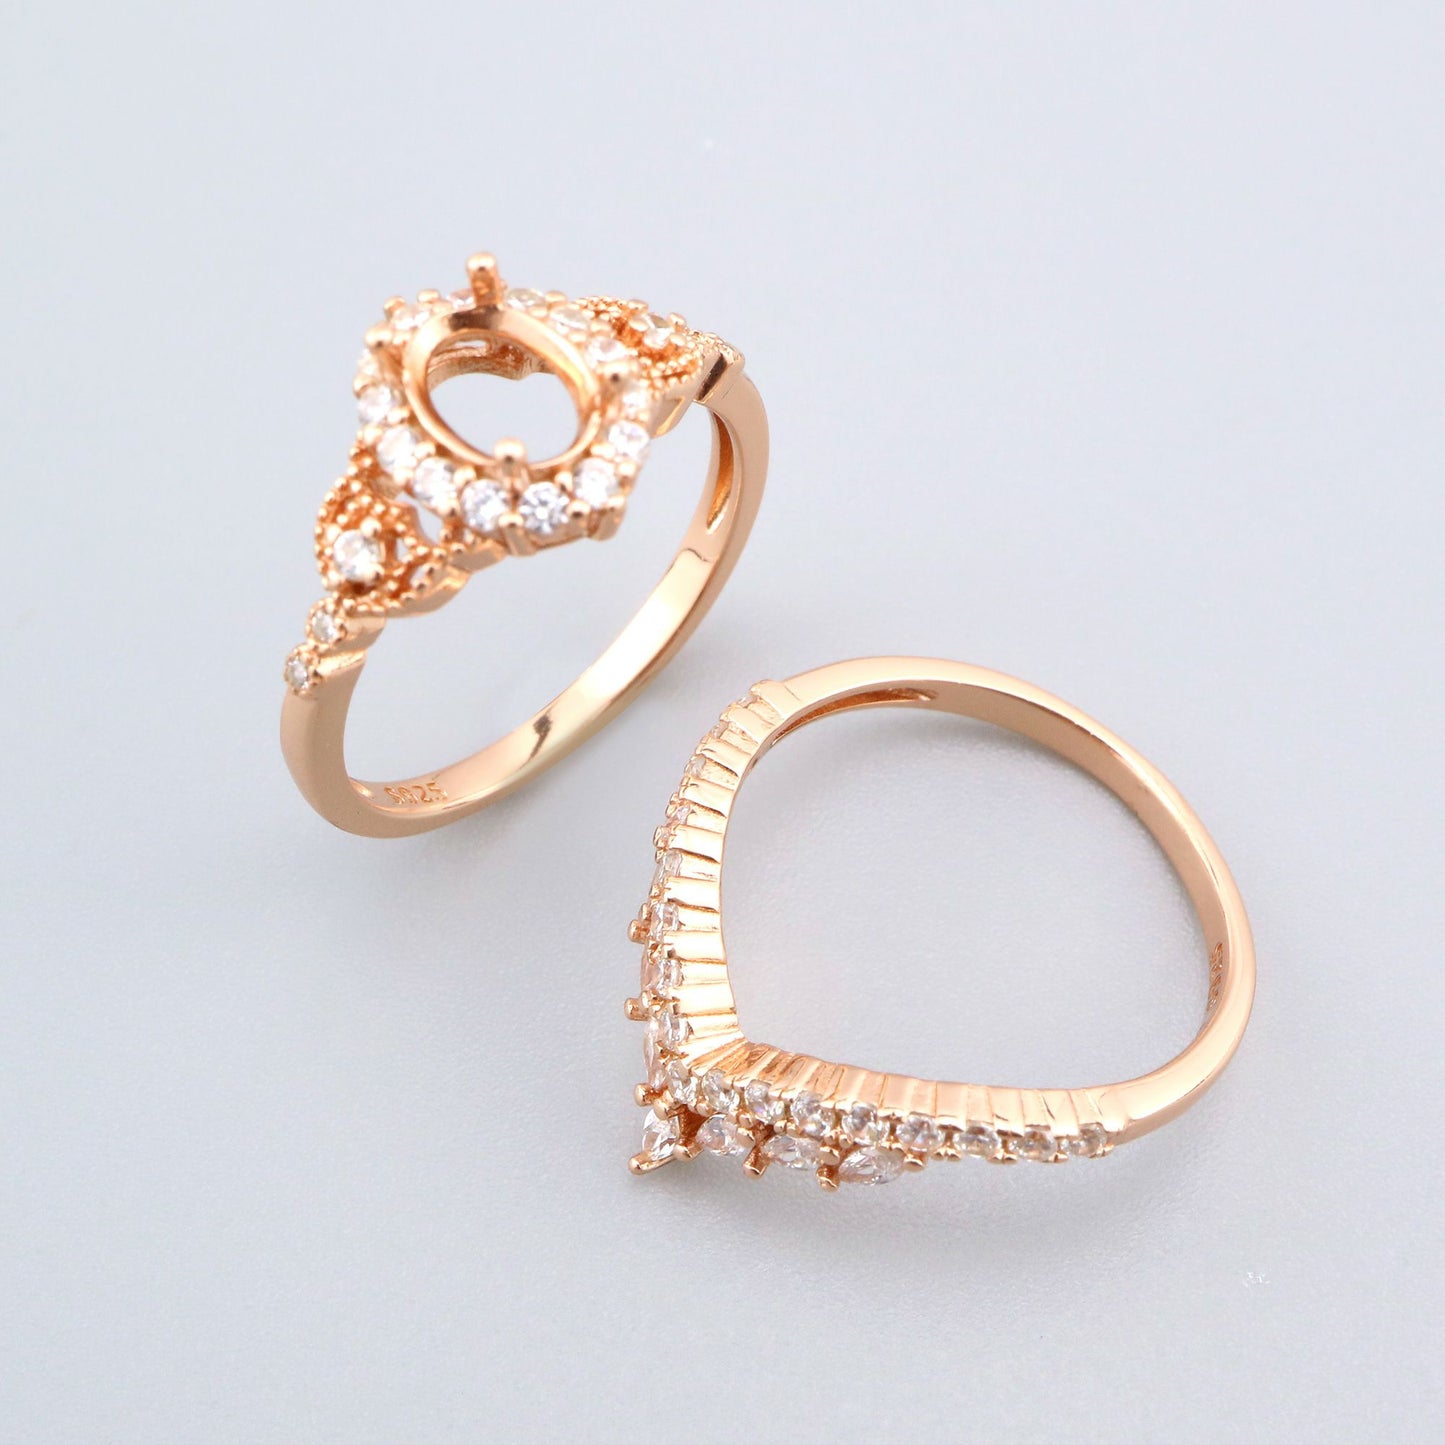 A rose gold oval halo with extra detail and a matching chevron wedding ring.